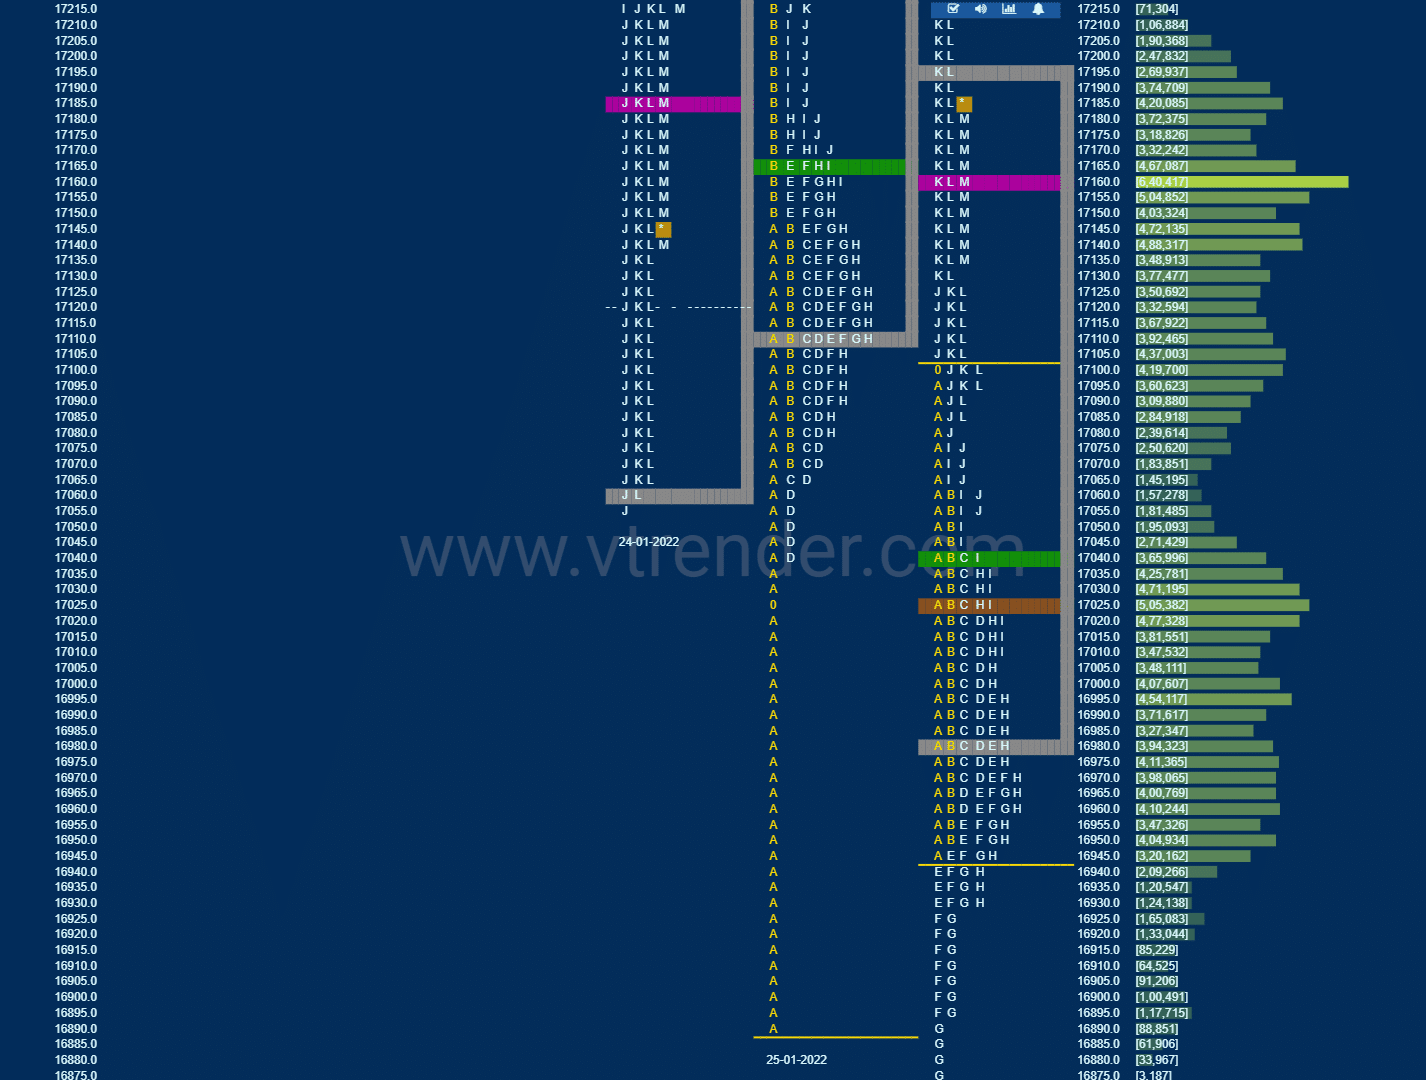 Nf 18 Market Profile Analysis Dated 27Th January 2022 Banknifty Futures, Charts, Day Trading, Intraday Trading, Intraday Trading Strategies, Market Profile, Market Profile Trading Strategies, Nifty Futures, Order Flow Analysis, Support And Resistance, Technical Analysis, Trading Strategies, Volume Profile Trading